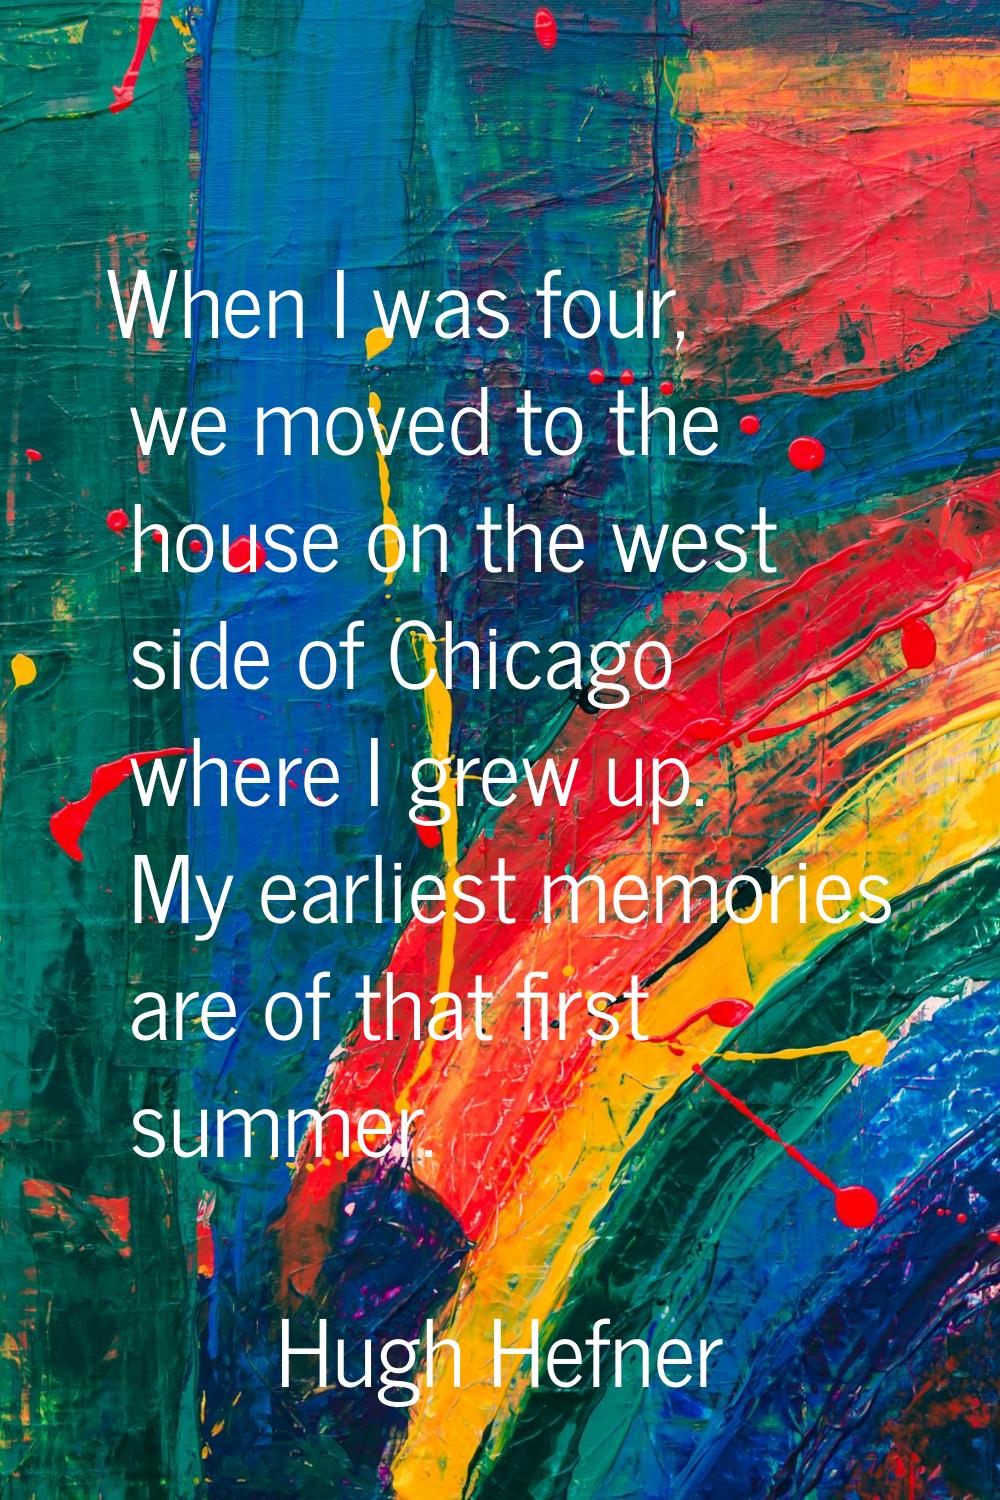 When I was four, we moved to the house on the west side of Chicago where I grew up. My earliest mem